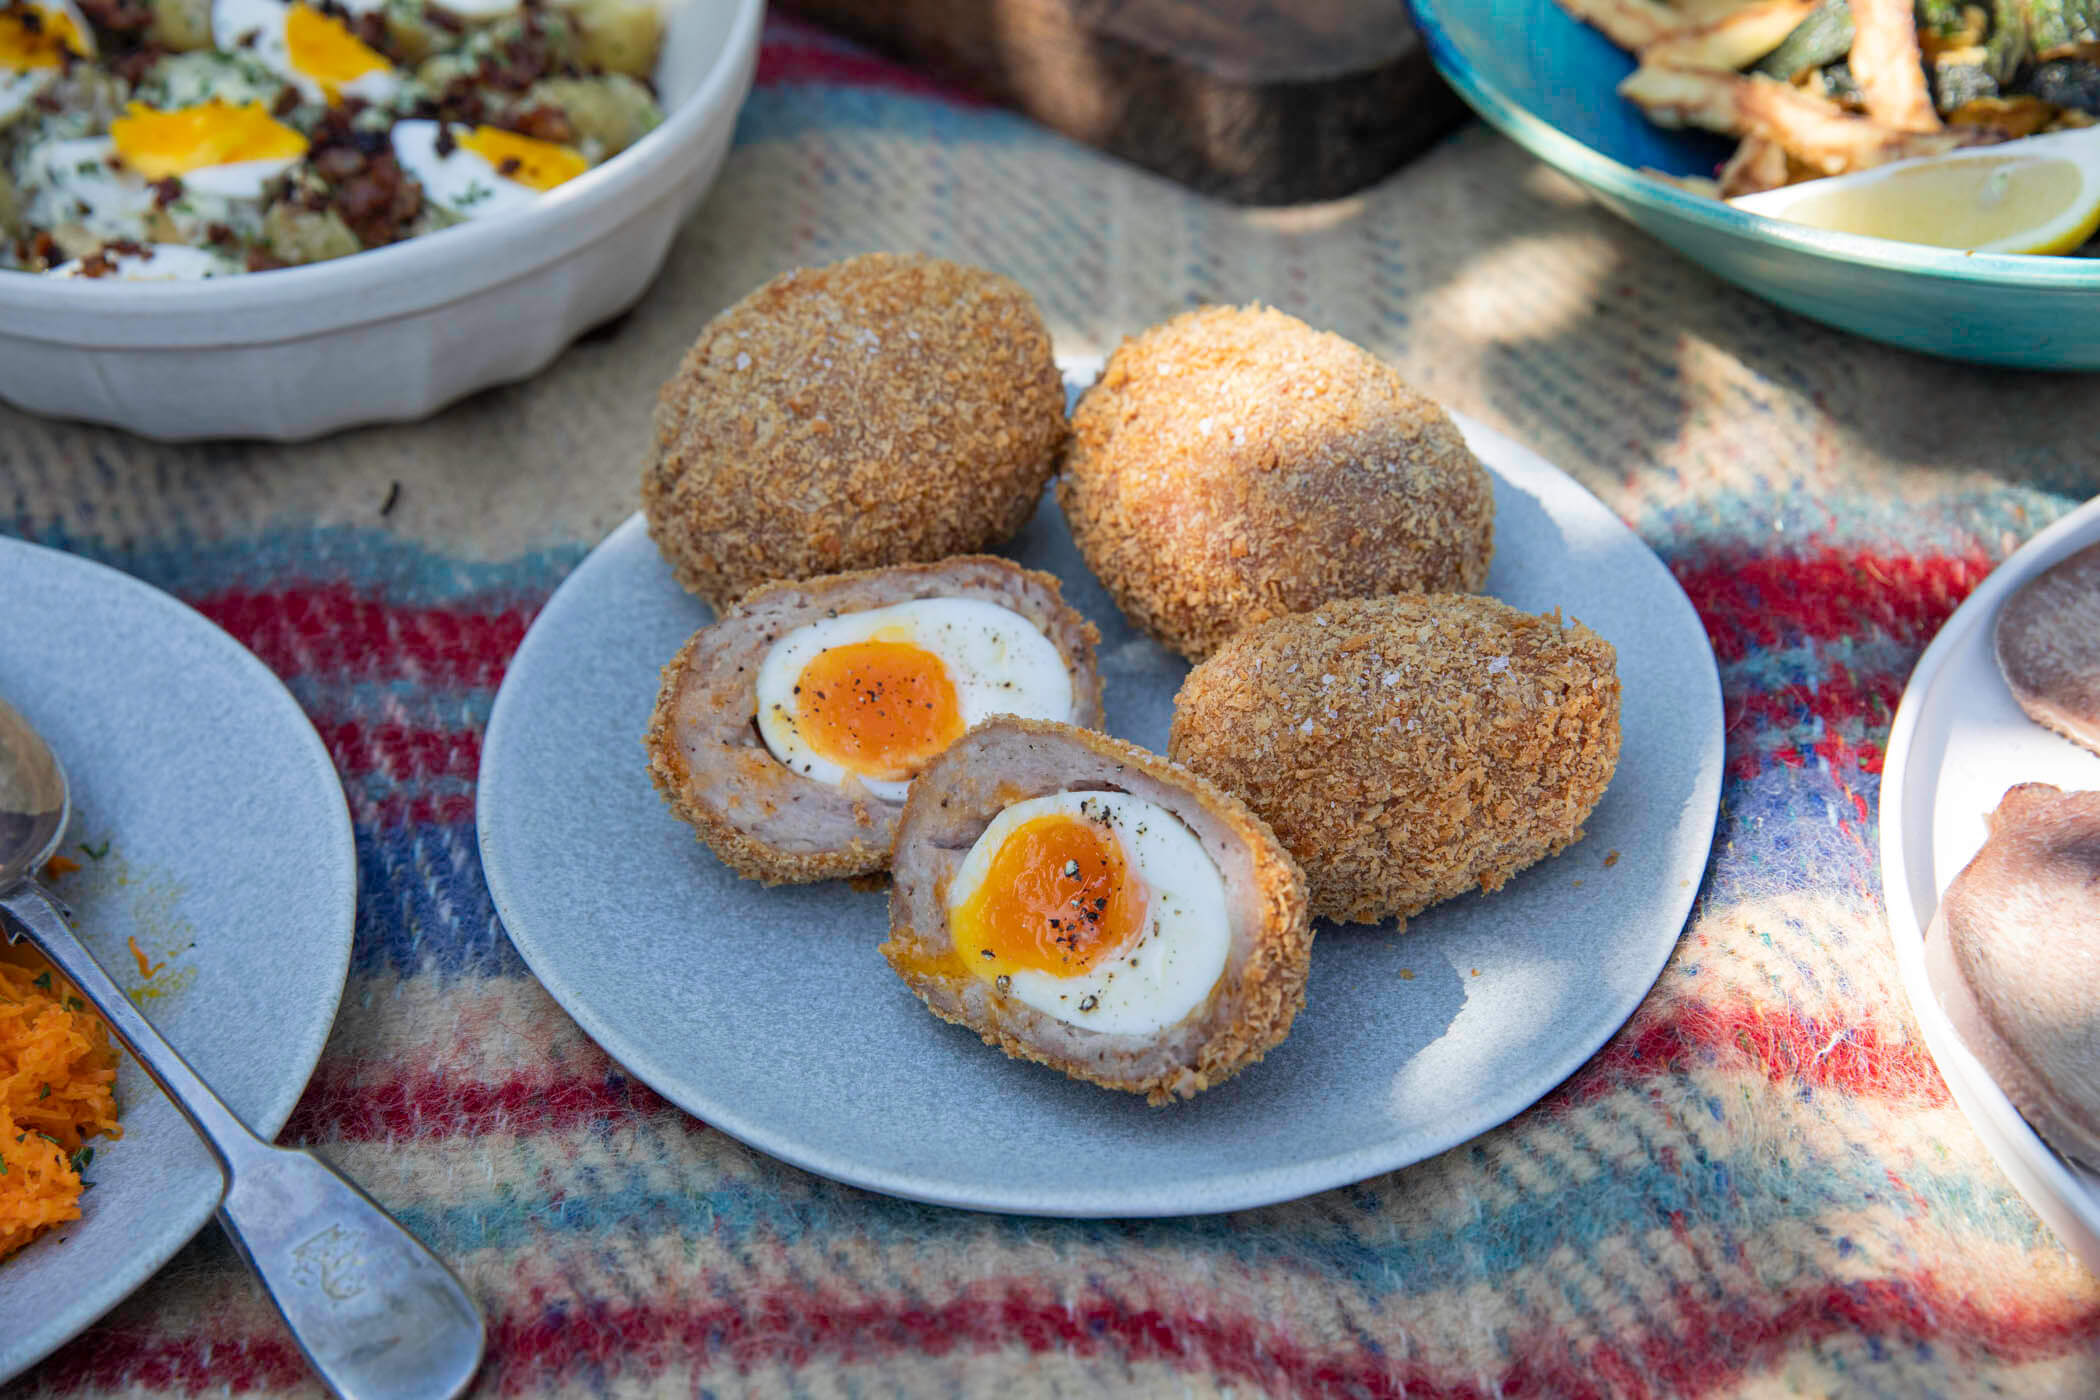 A photo of four scotch eggs on a plate, one of them is cut in half. The plate is laid on a picnic blanket, with dappled sunlight.